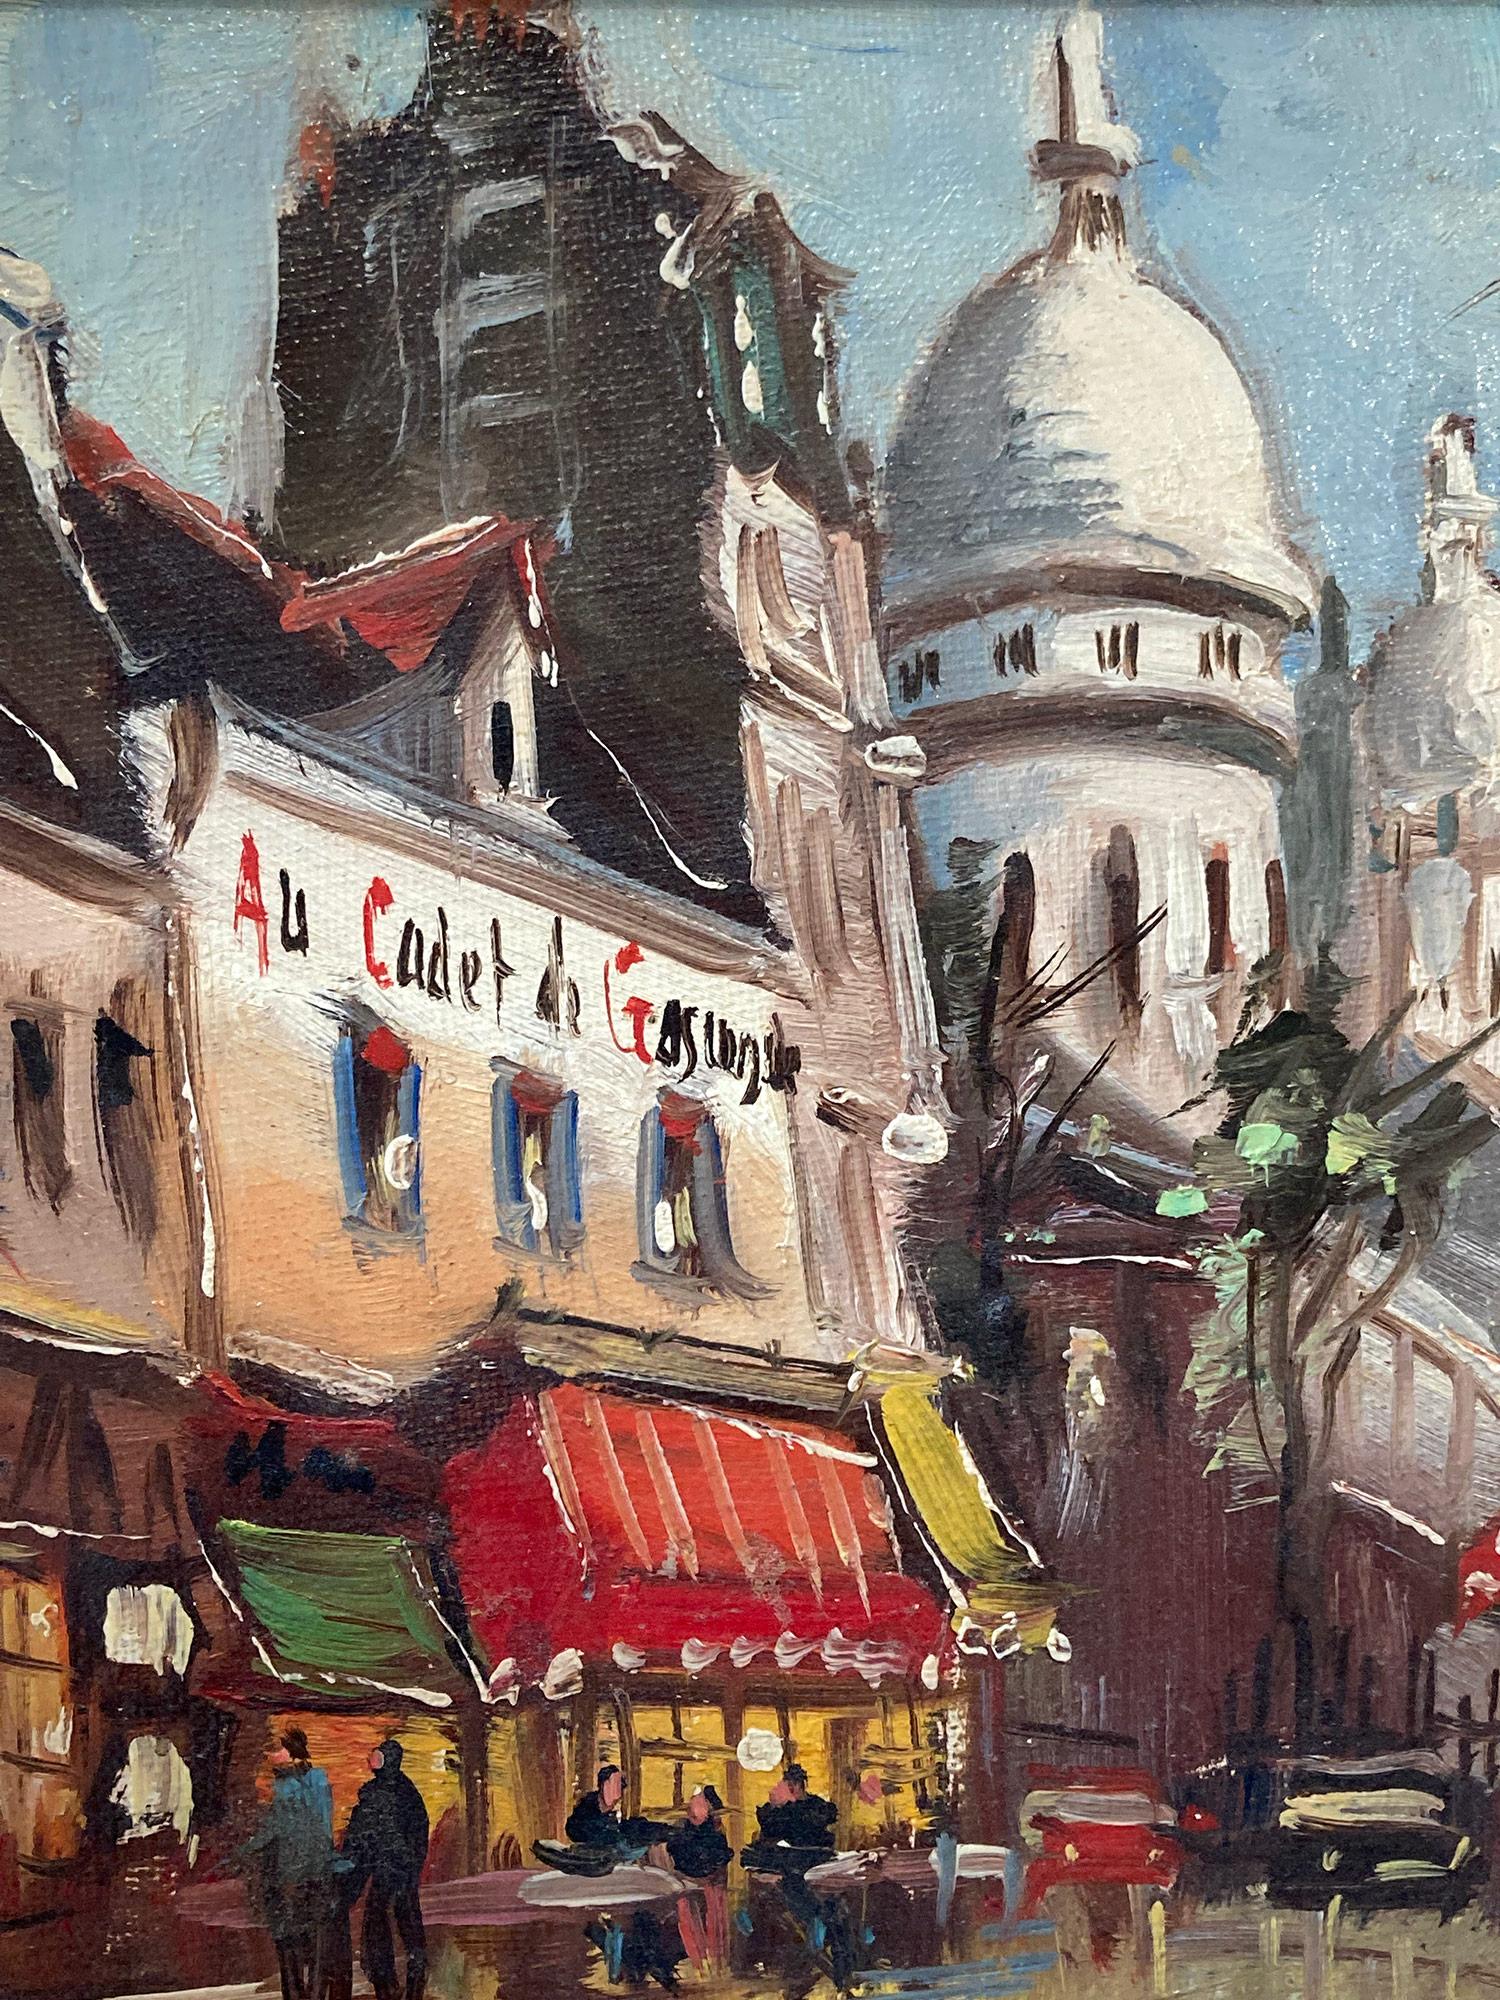 This painting is a tremendously vivid and alive street scene from Paris in the 20th Century, depicting The Place du Tertre. This square is in the 18th arrondissement of Paris, France. Only a few streets away from Montmartre's Basilica of the Sacré